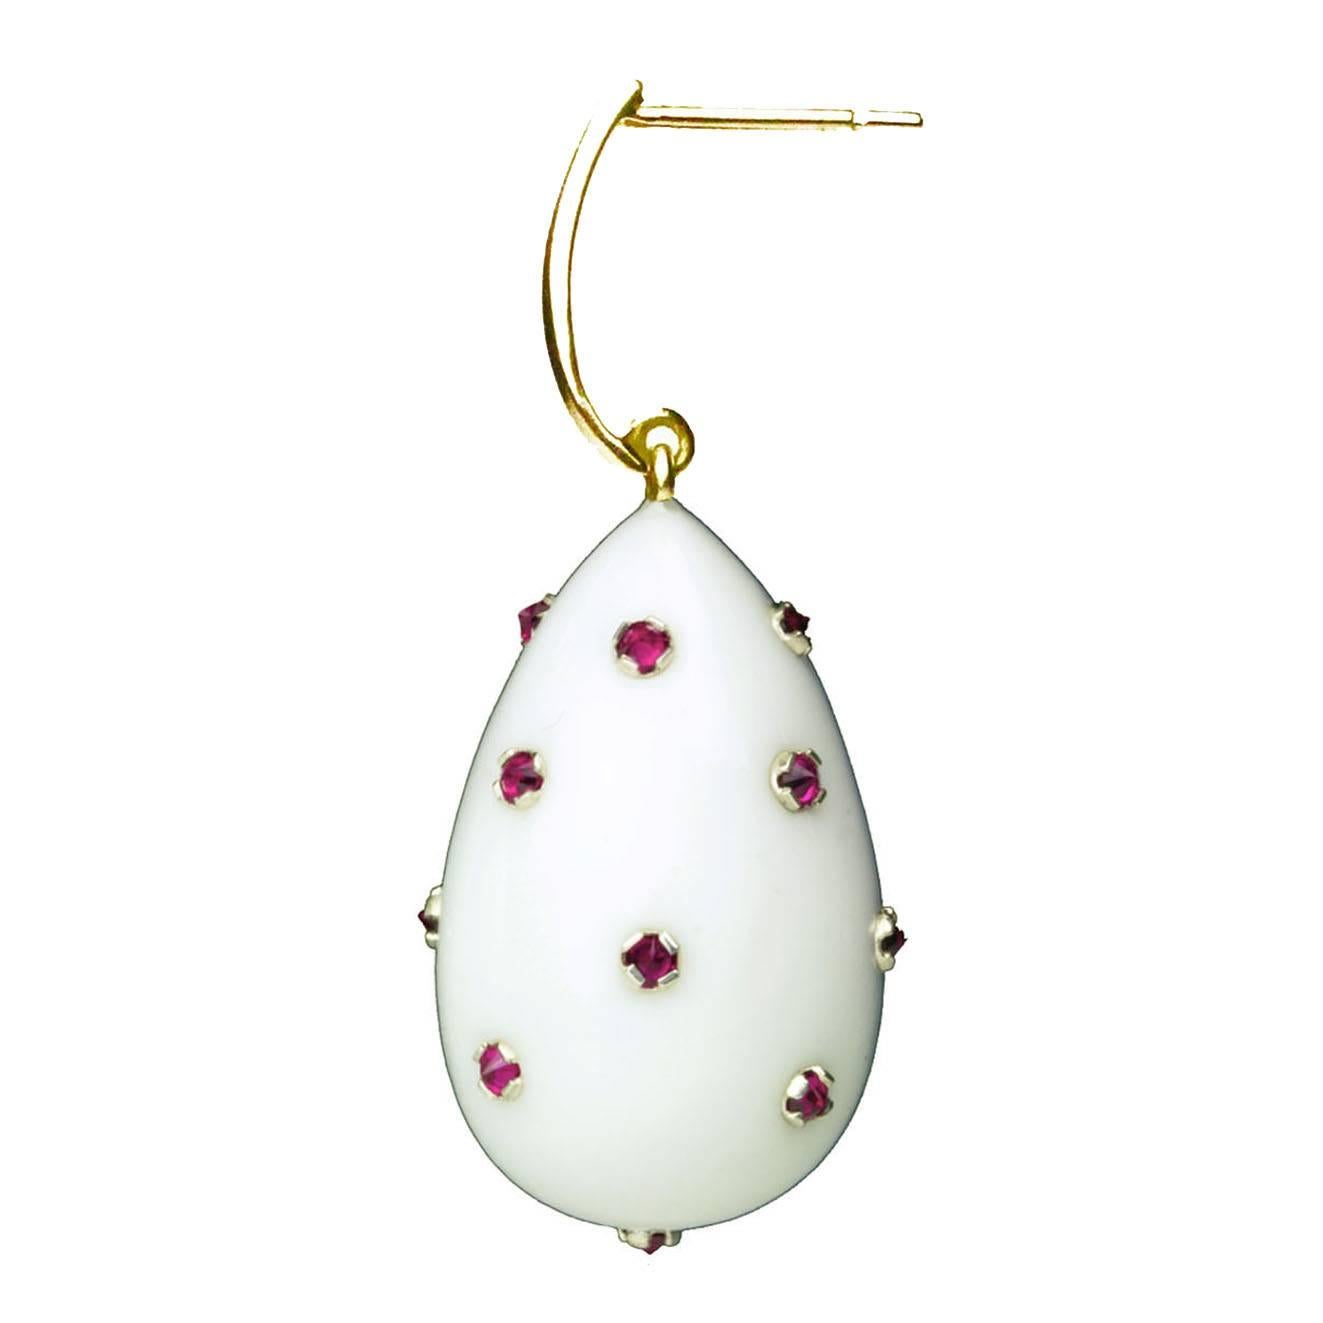 These elegant earrings are inspired by renaissance jewelry that had small stones incrusted into the piece. White Agate has been carved into a drop and with rubies on 18 carat gold tops.  They are light and easy to wear, as well as being extremely